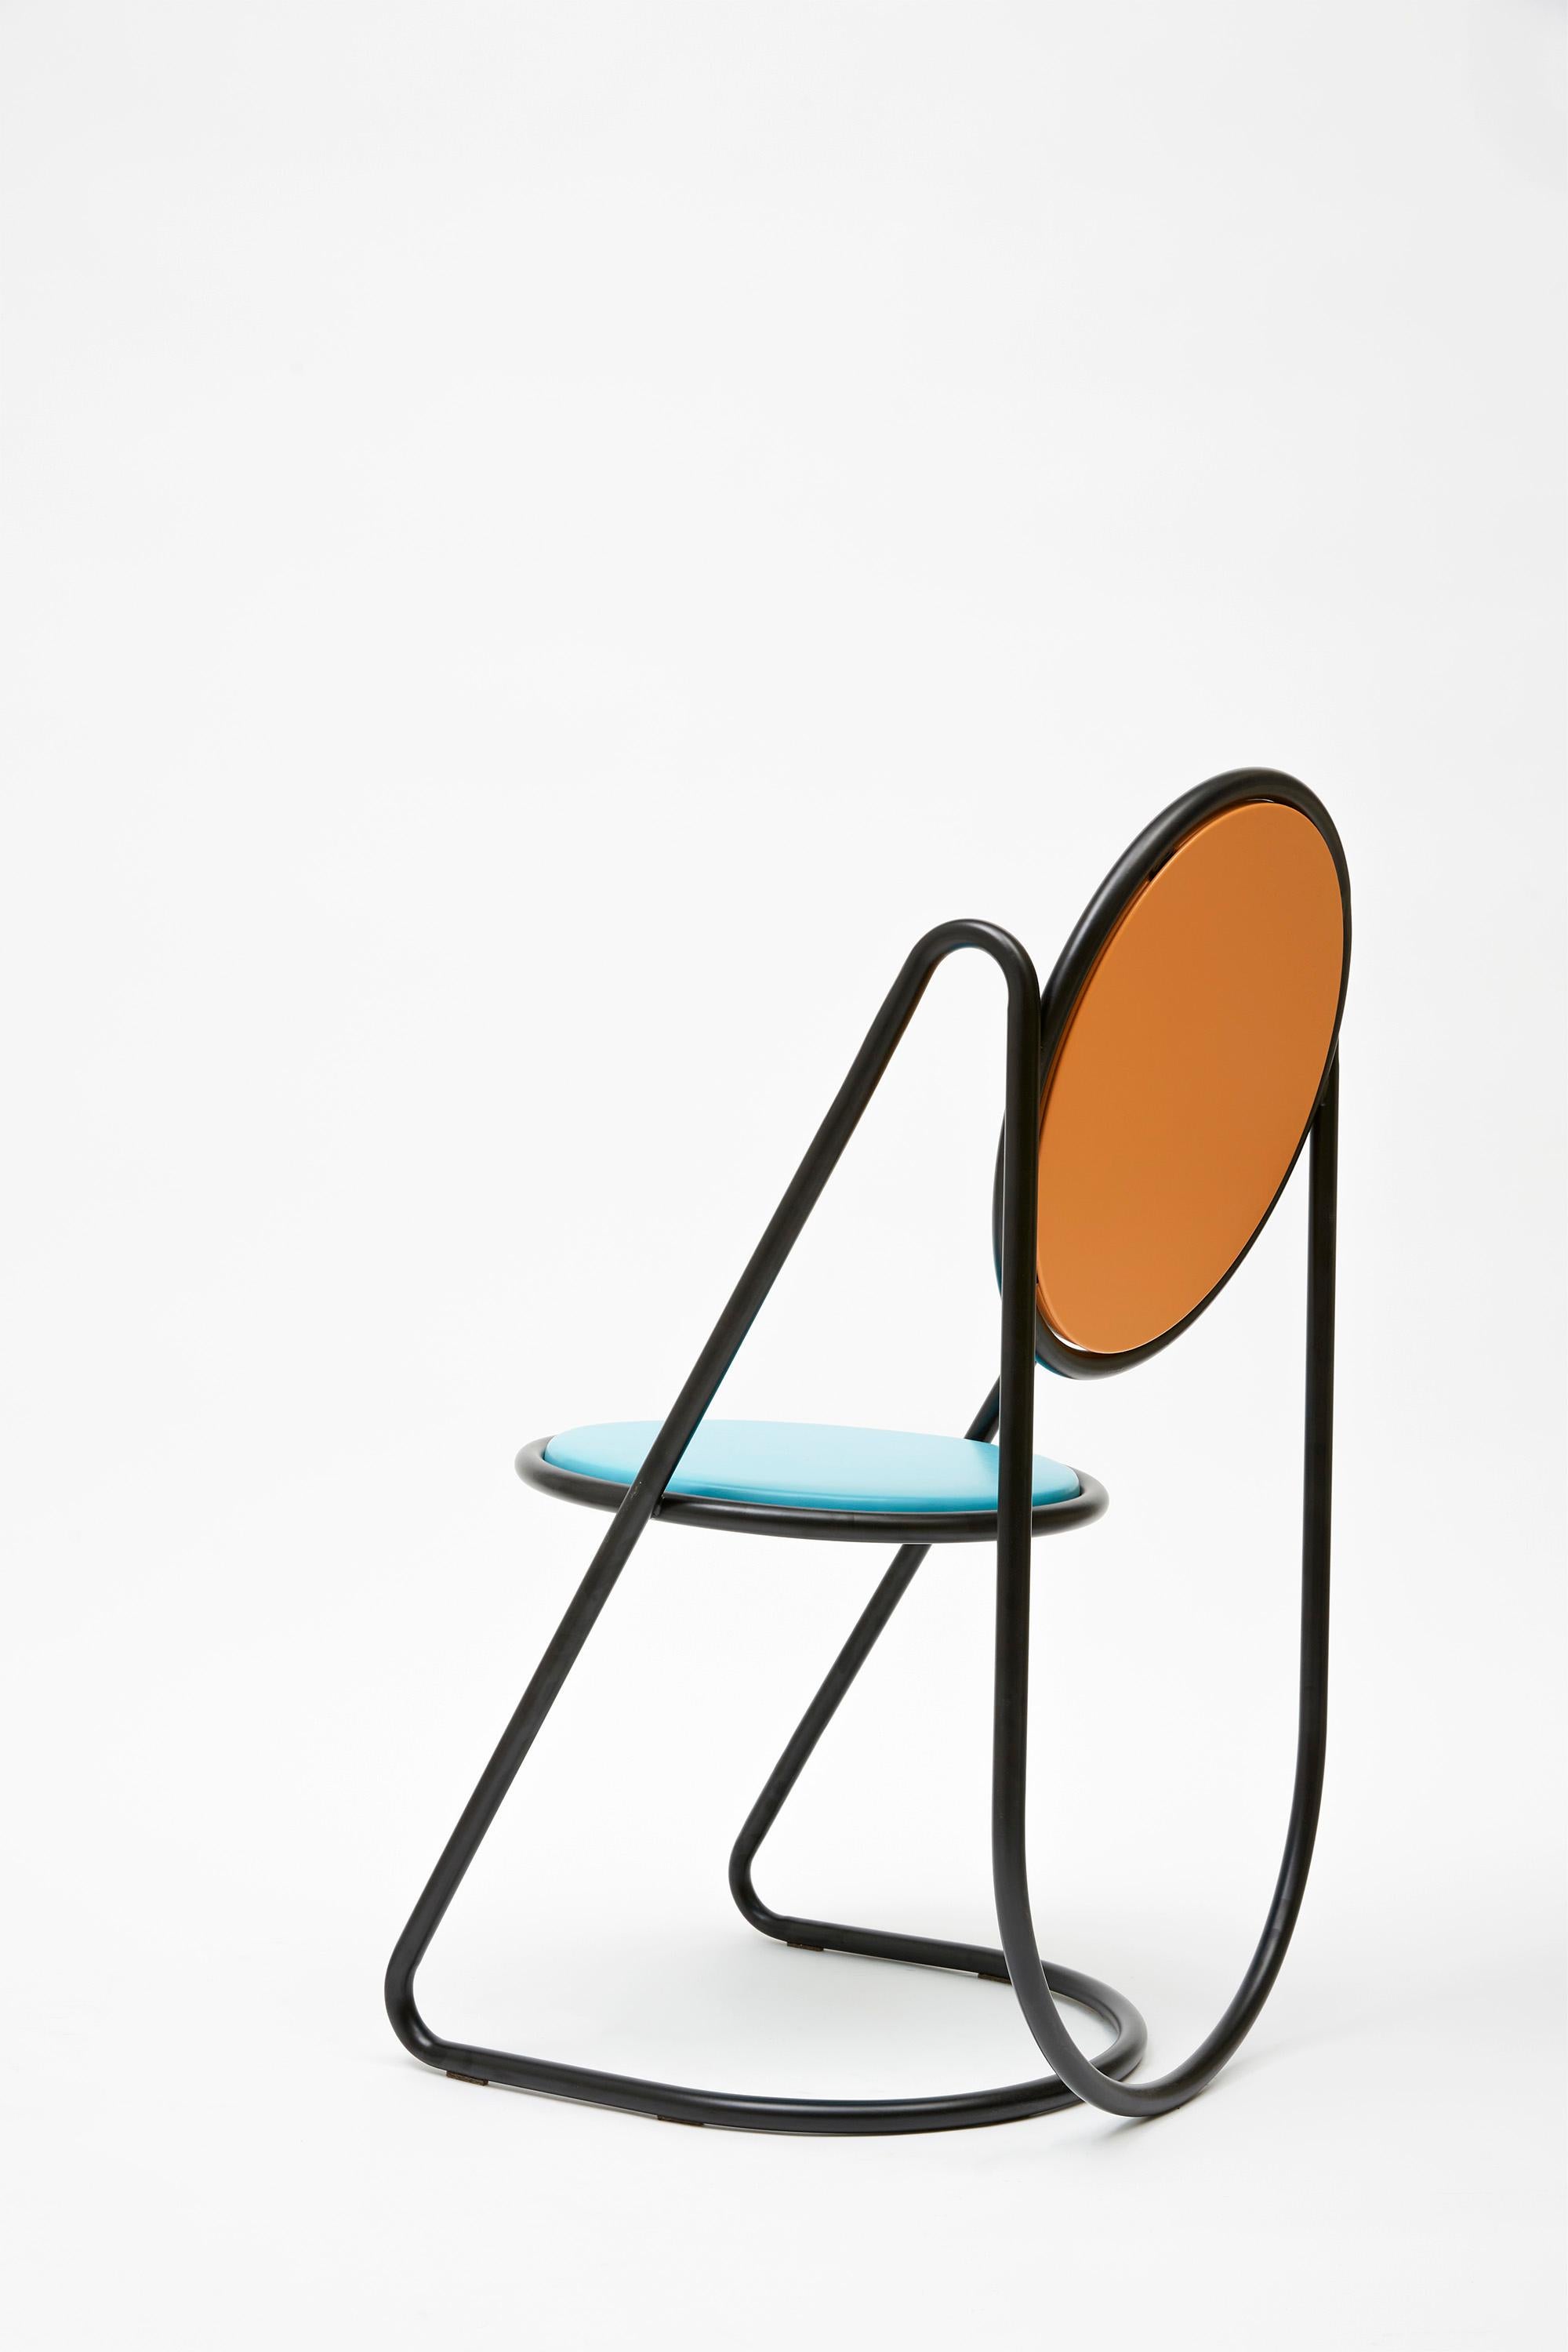 U-Disk Chair, Black, Orange & Light Blue In New Condition For Sale In Milano, IT